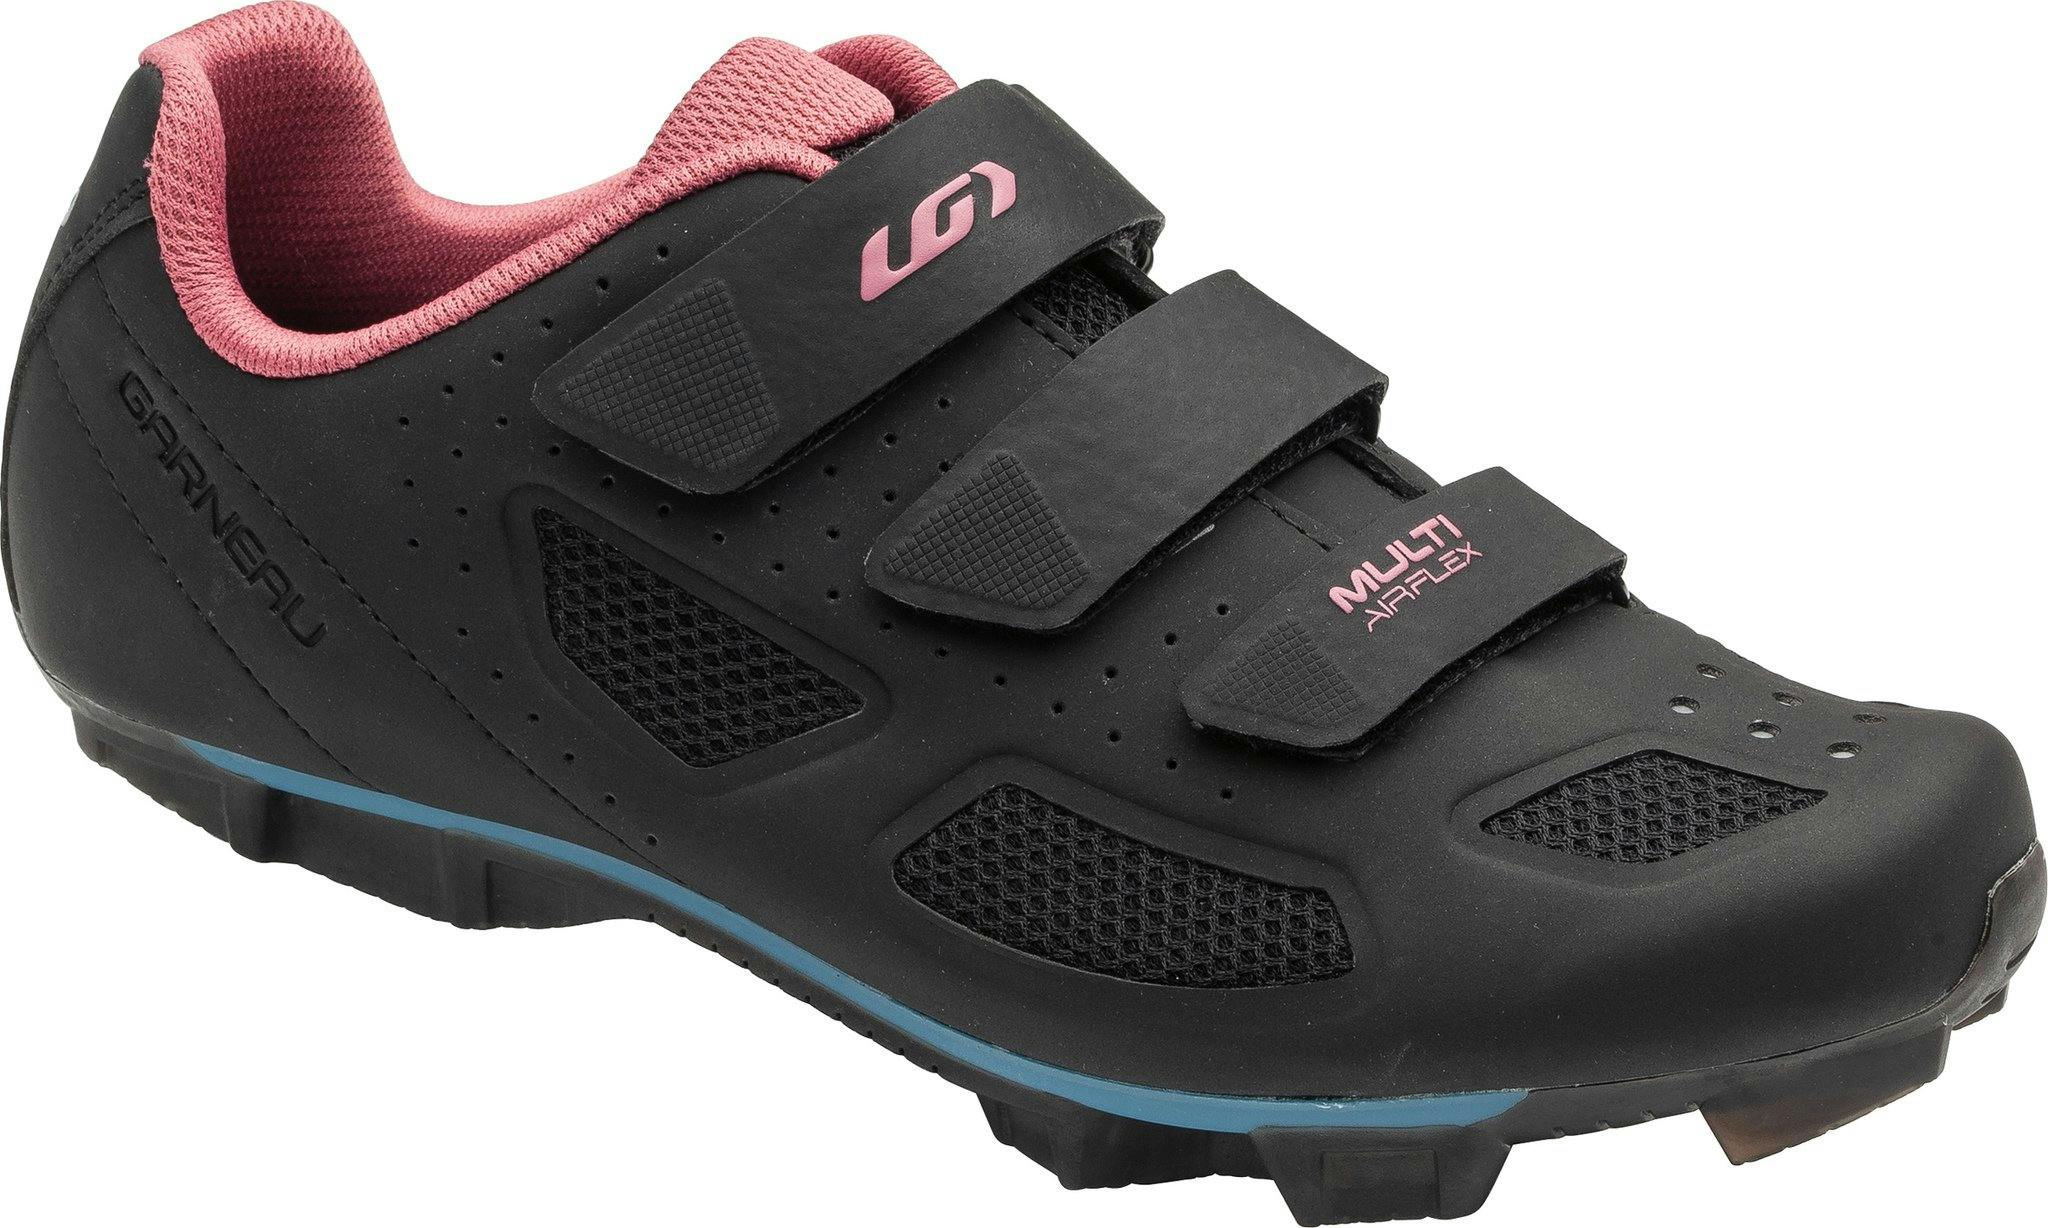 Product image for Multi Air Flex II Cycling Shoes - Women's